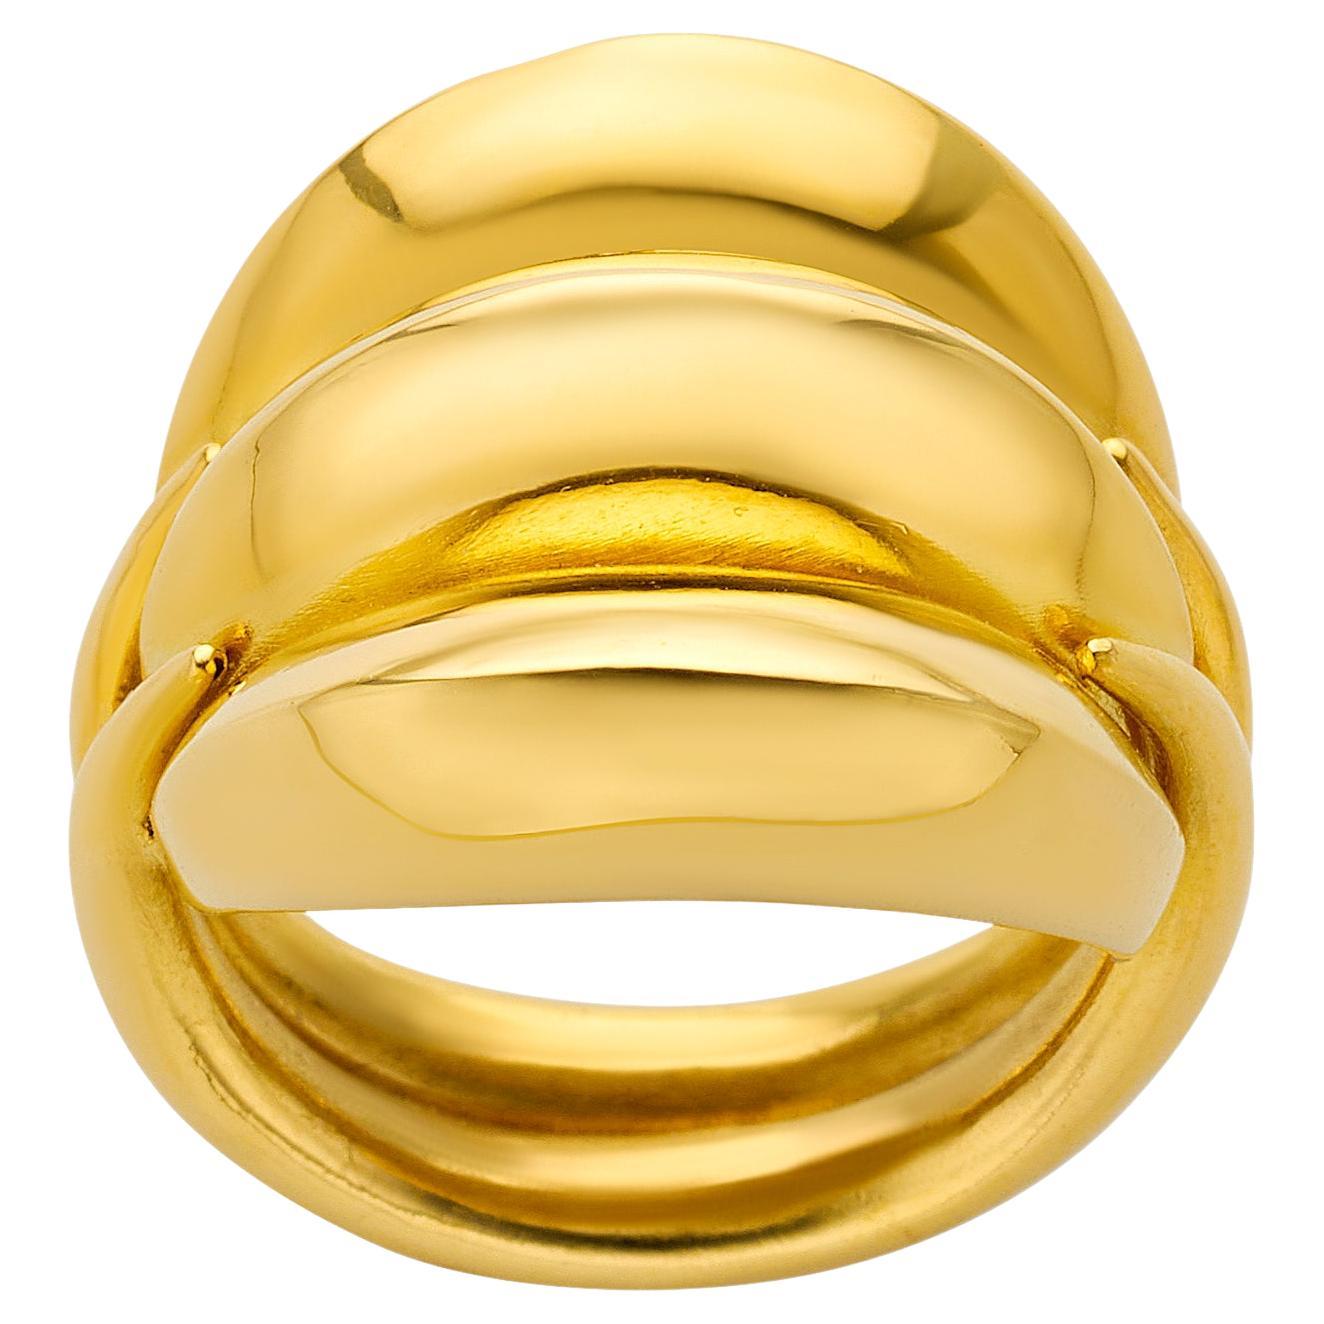 1970's Lalaounis 22k Yellow Gold Triple Dome Ring